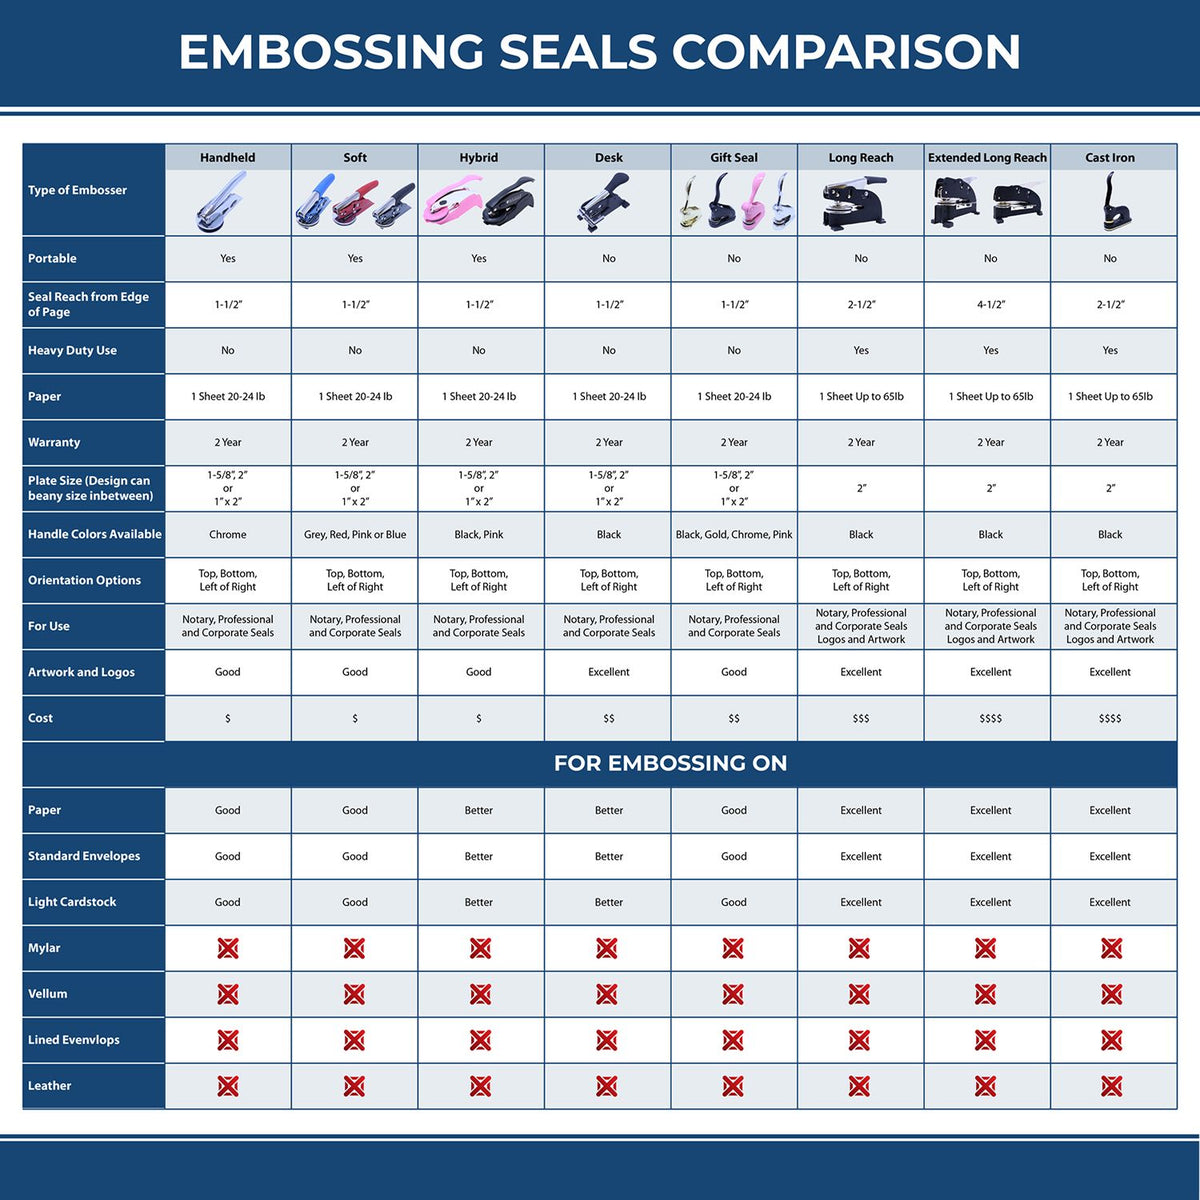 A comparison chart for the different types of mount models available for the Soft Mississippi Professional Engineer Seal.